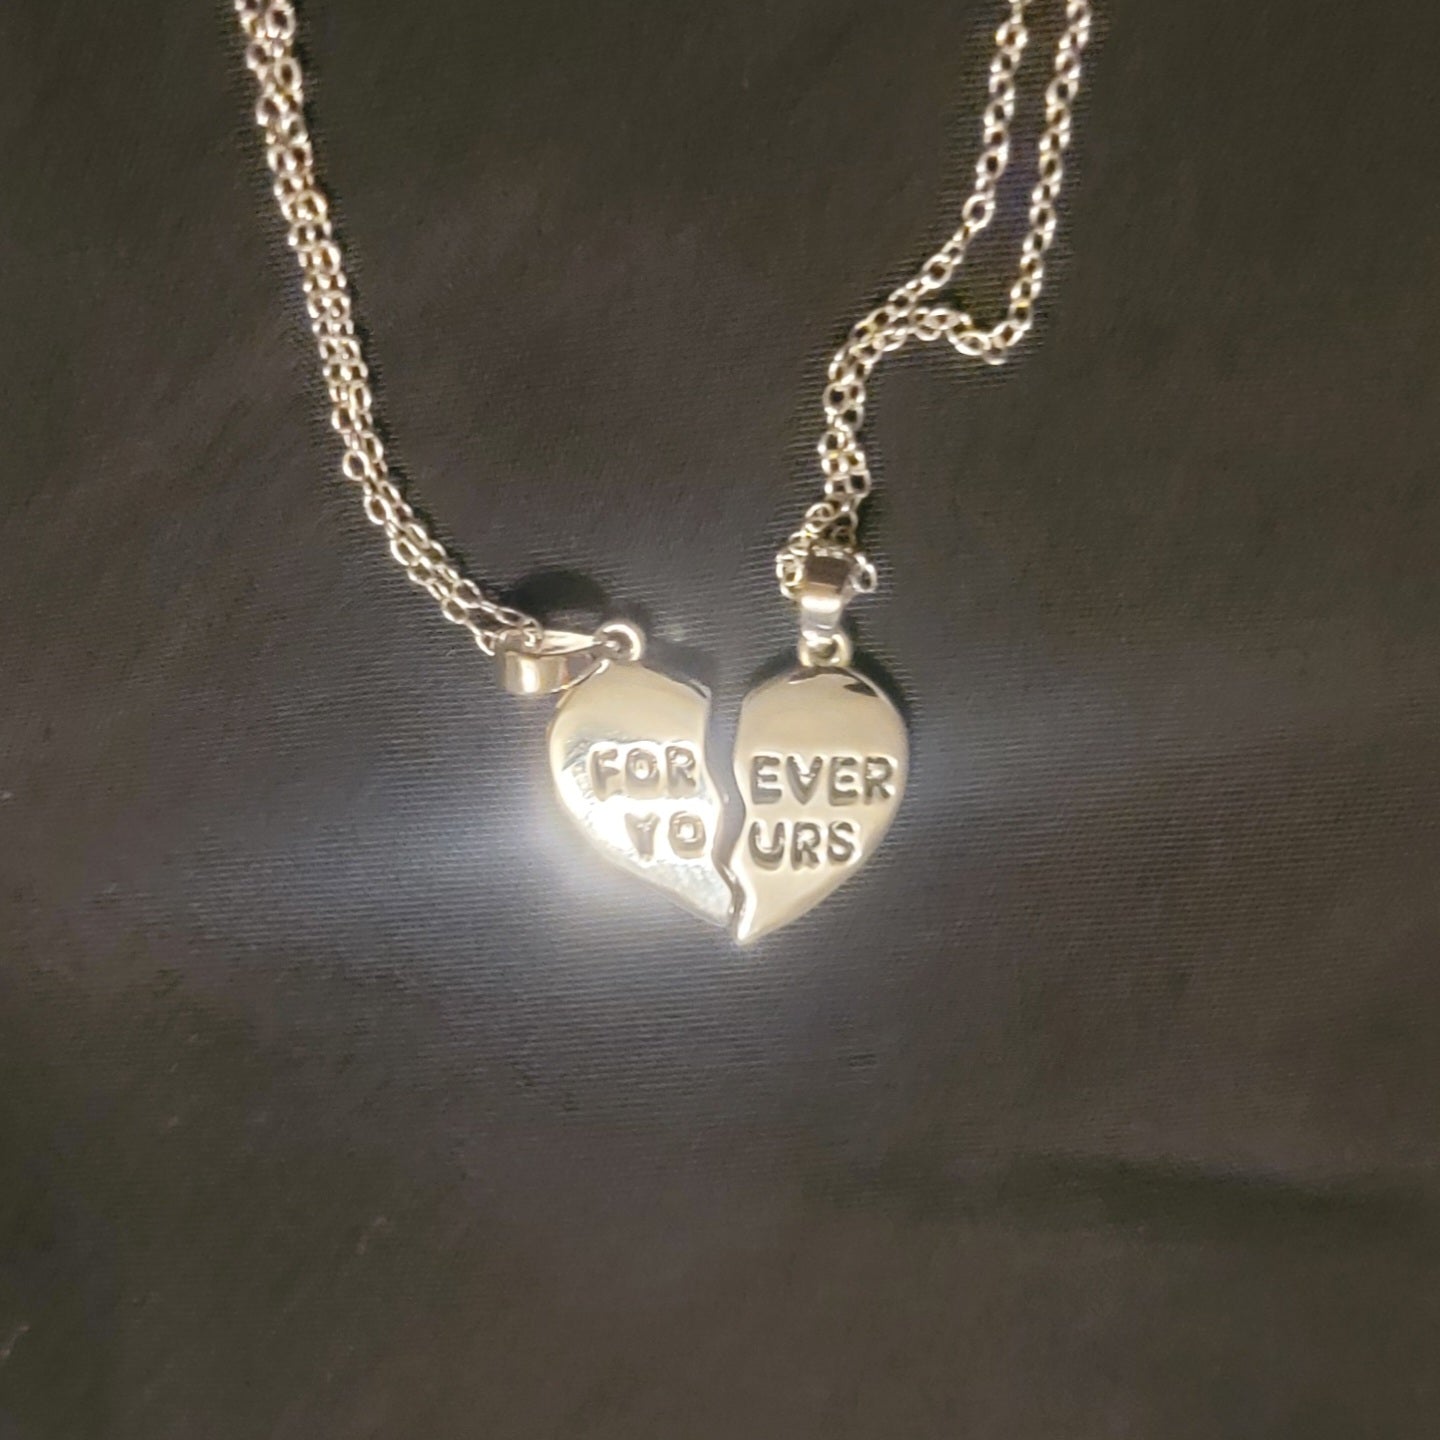 Two Necklace with Heart Pieces. Pendant Engraved with Forever Yours